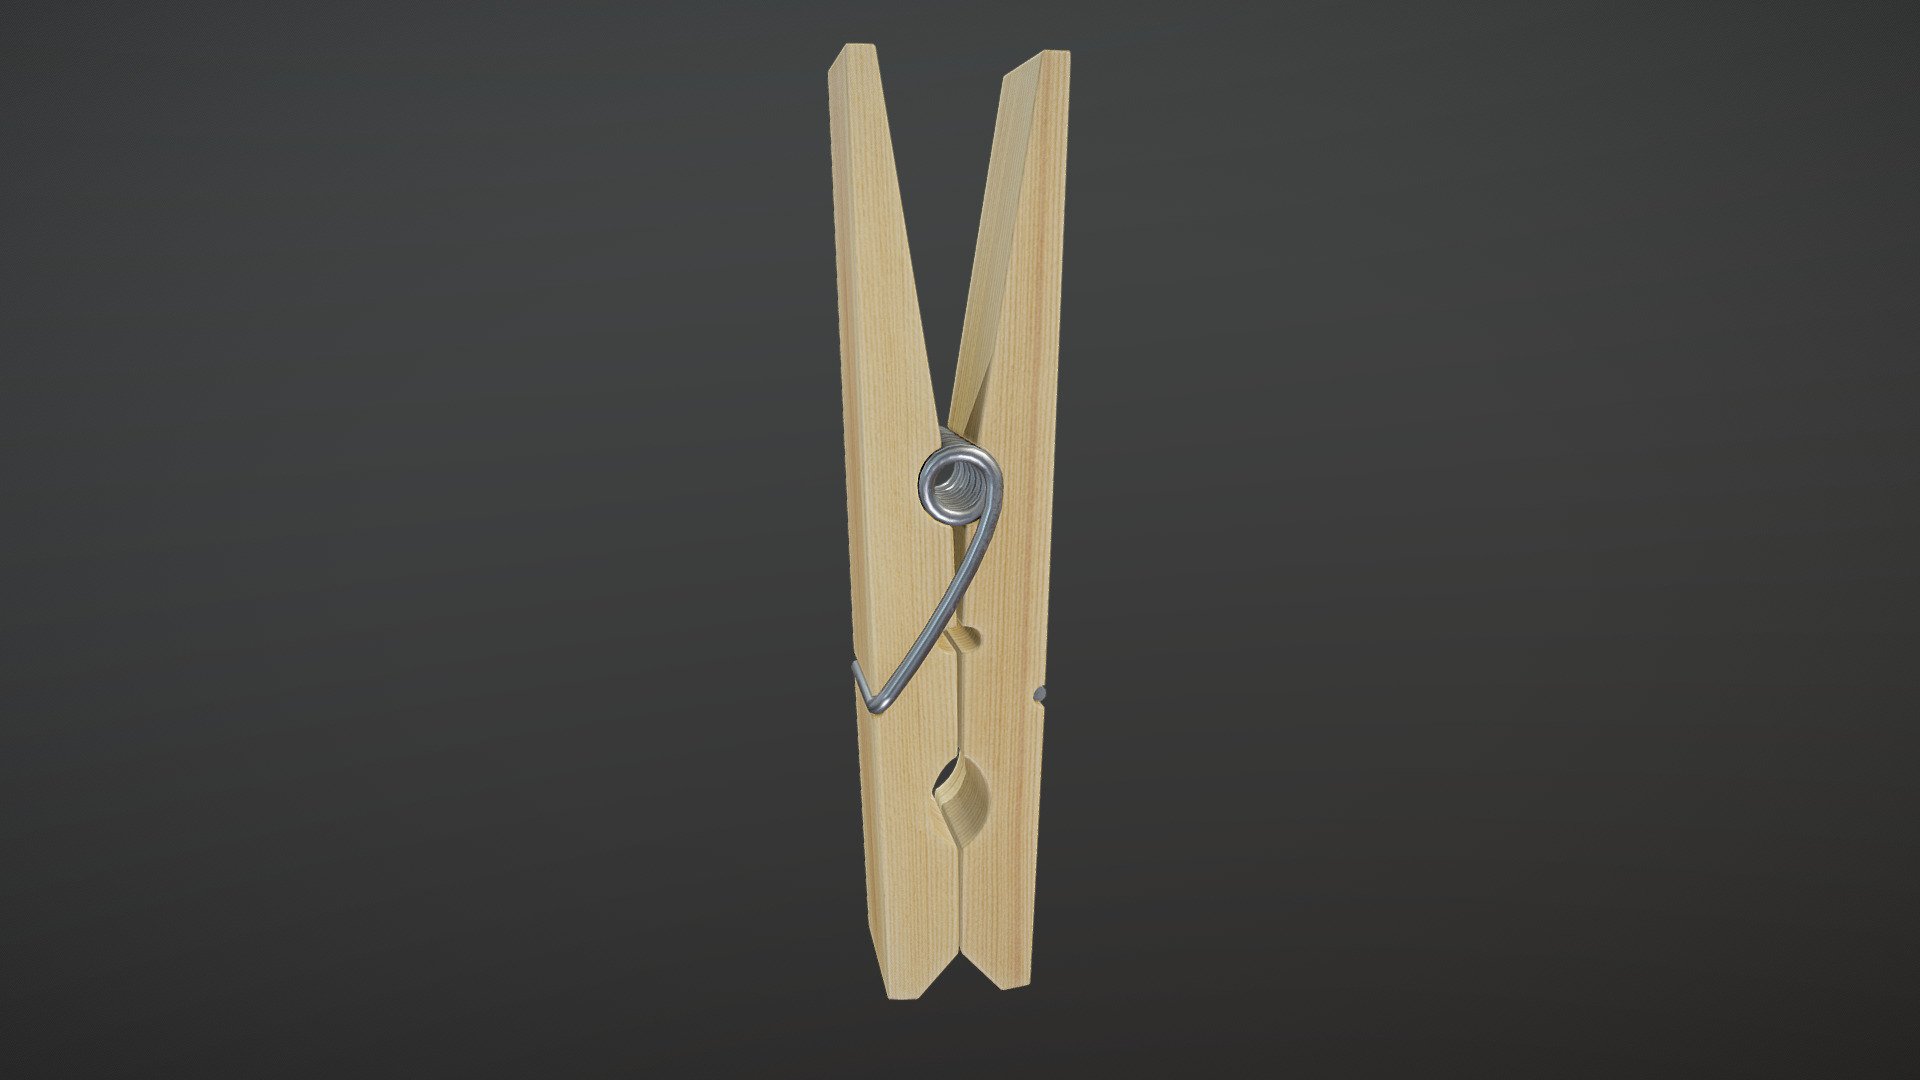 3D model of animated wooden clothes peg 3d model